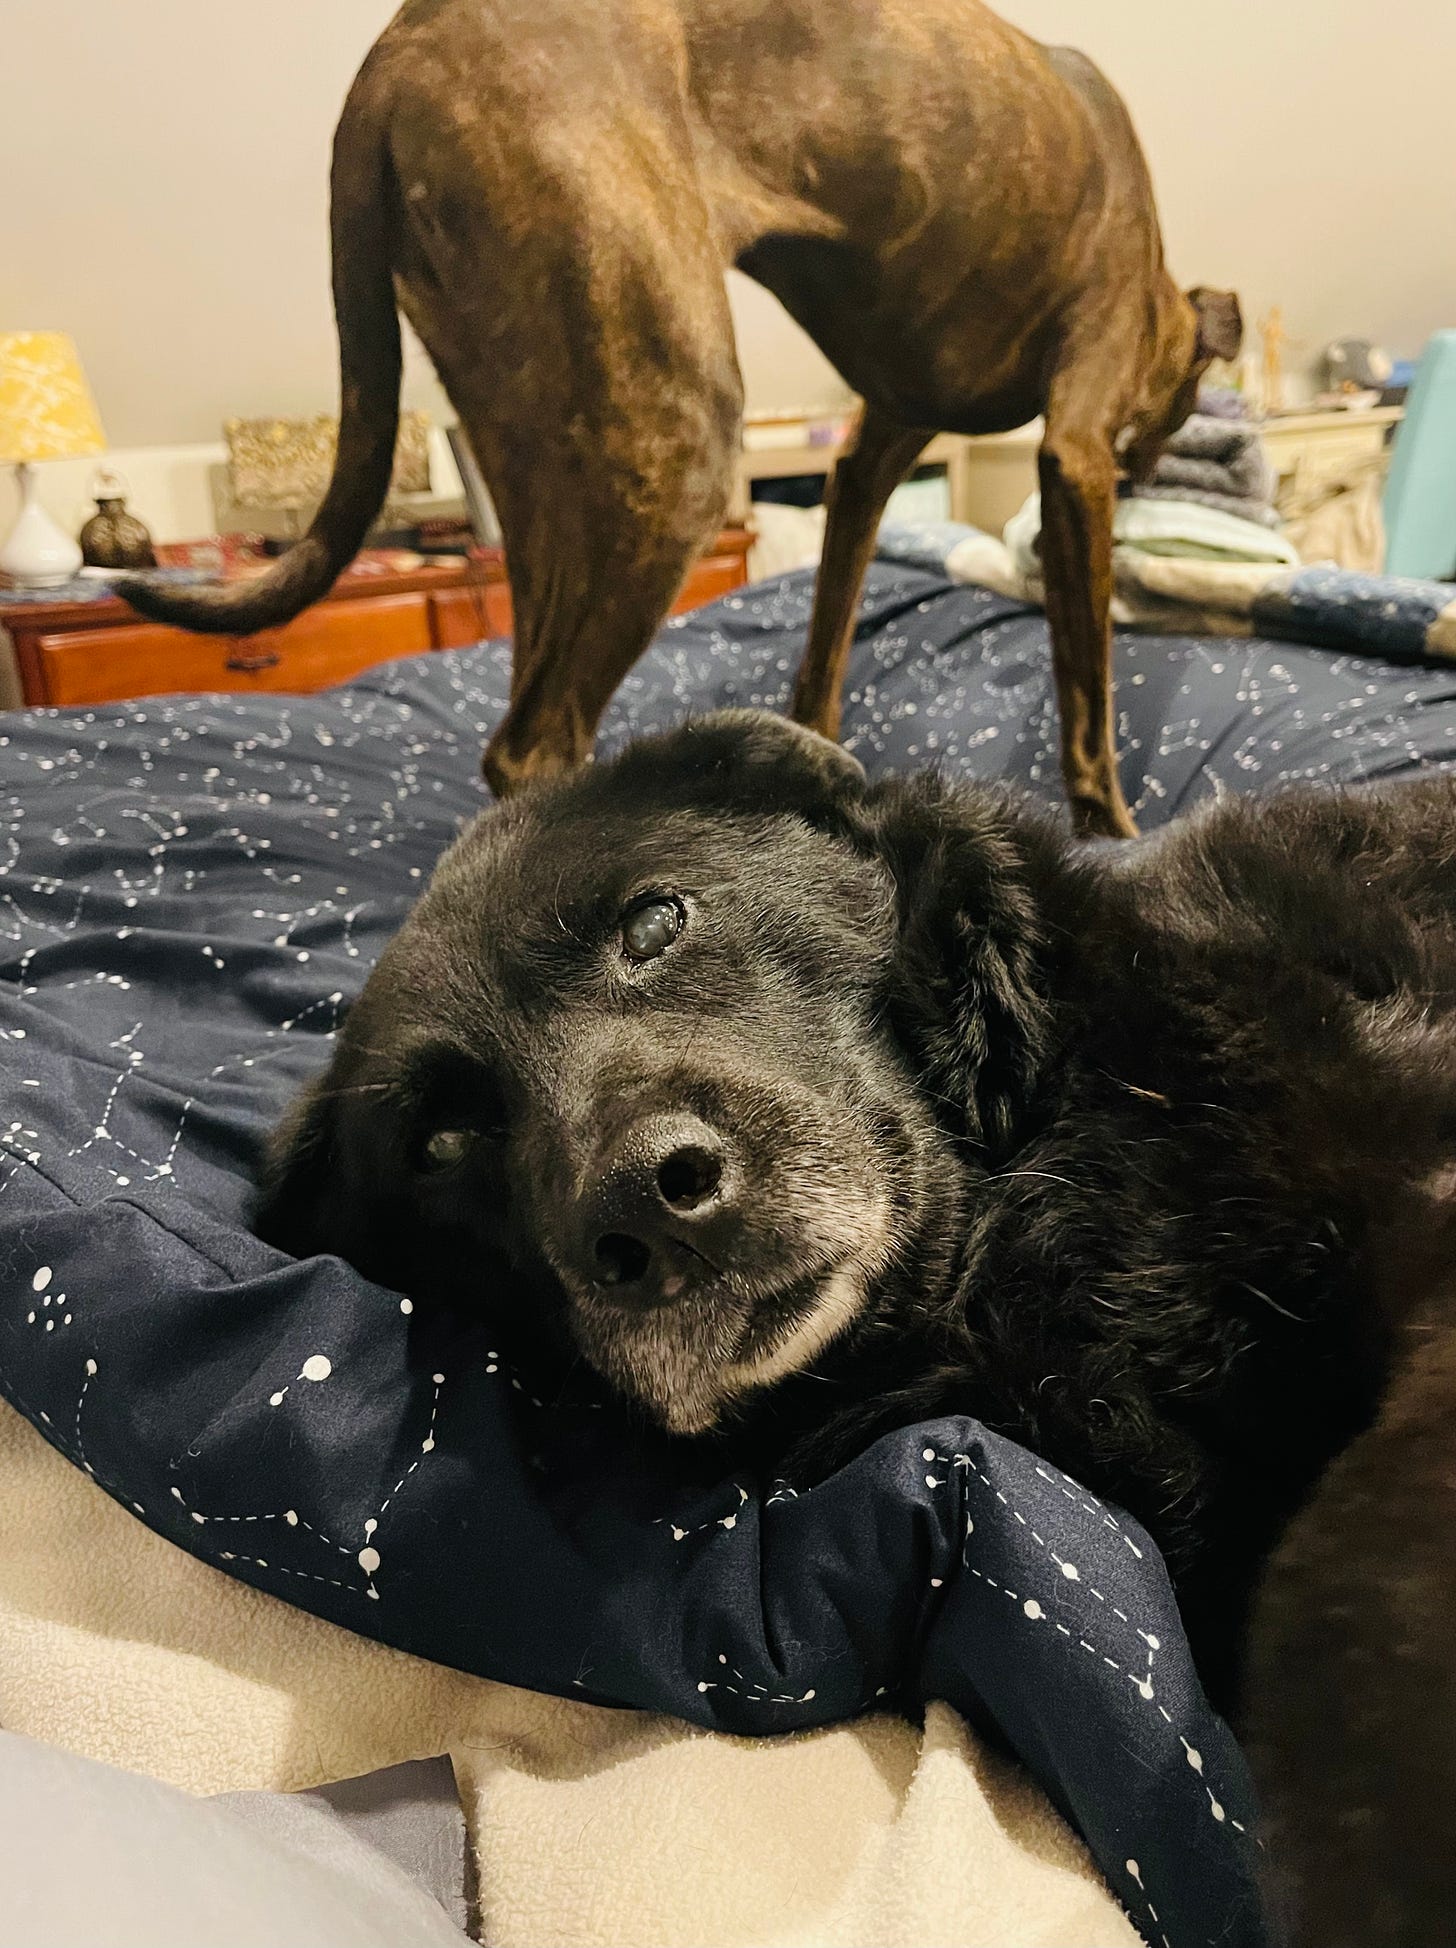 Dog flopped sideways on a bed. In the background is another dog standing, heading somewhere